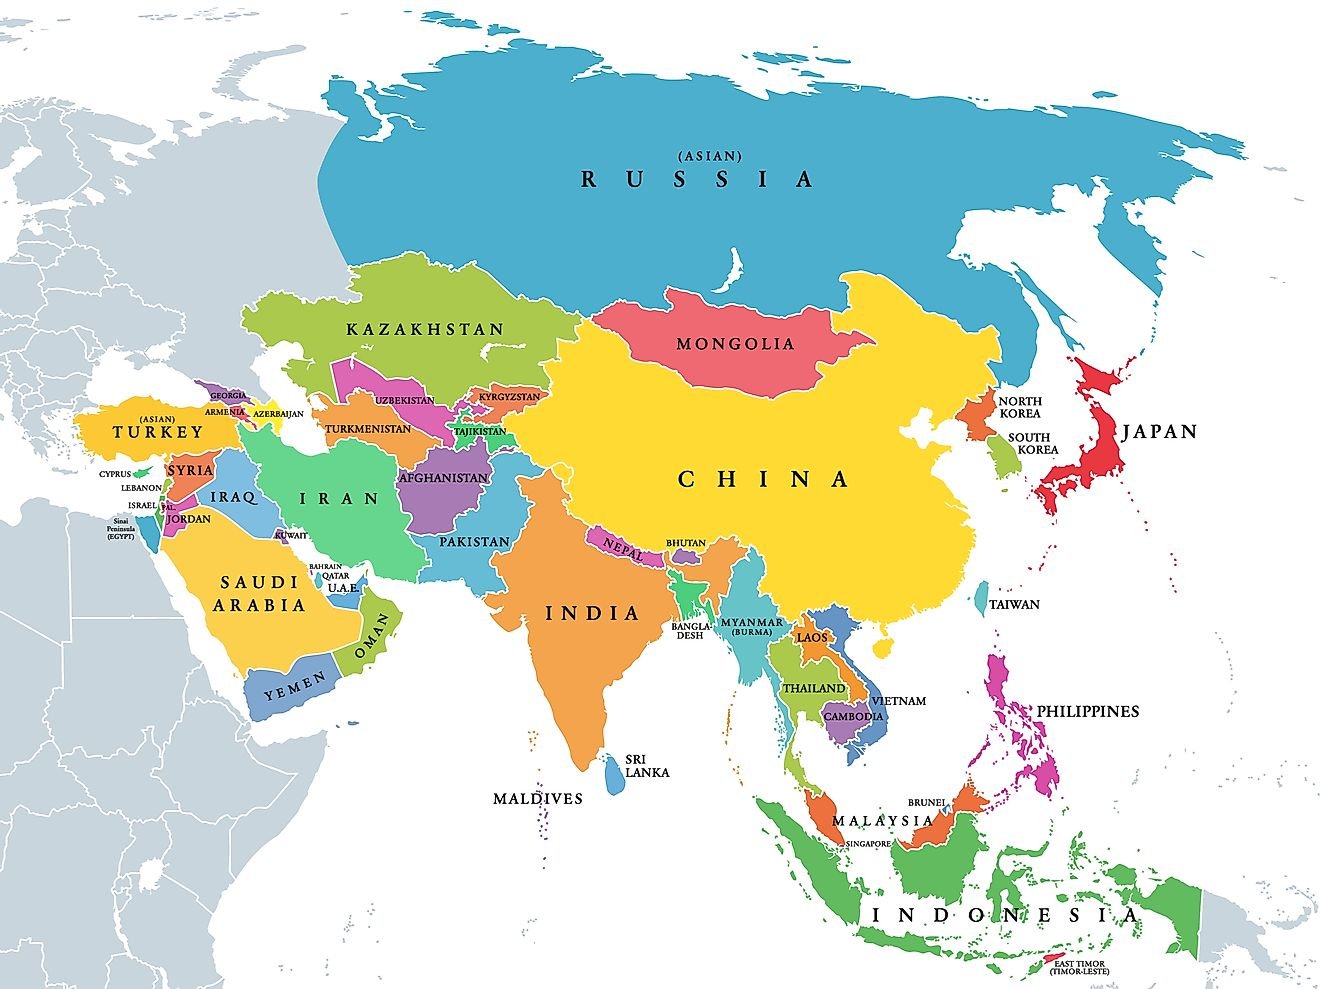 What Are The Five Regions of Asia?